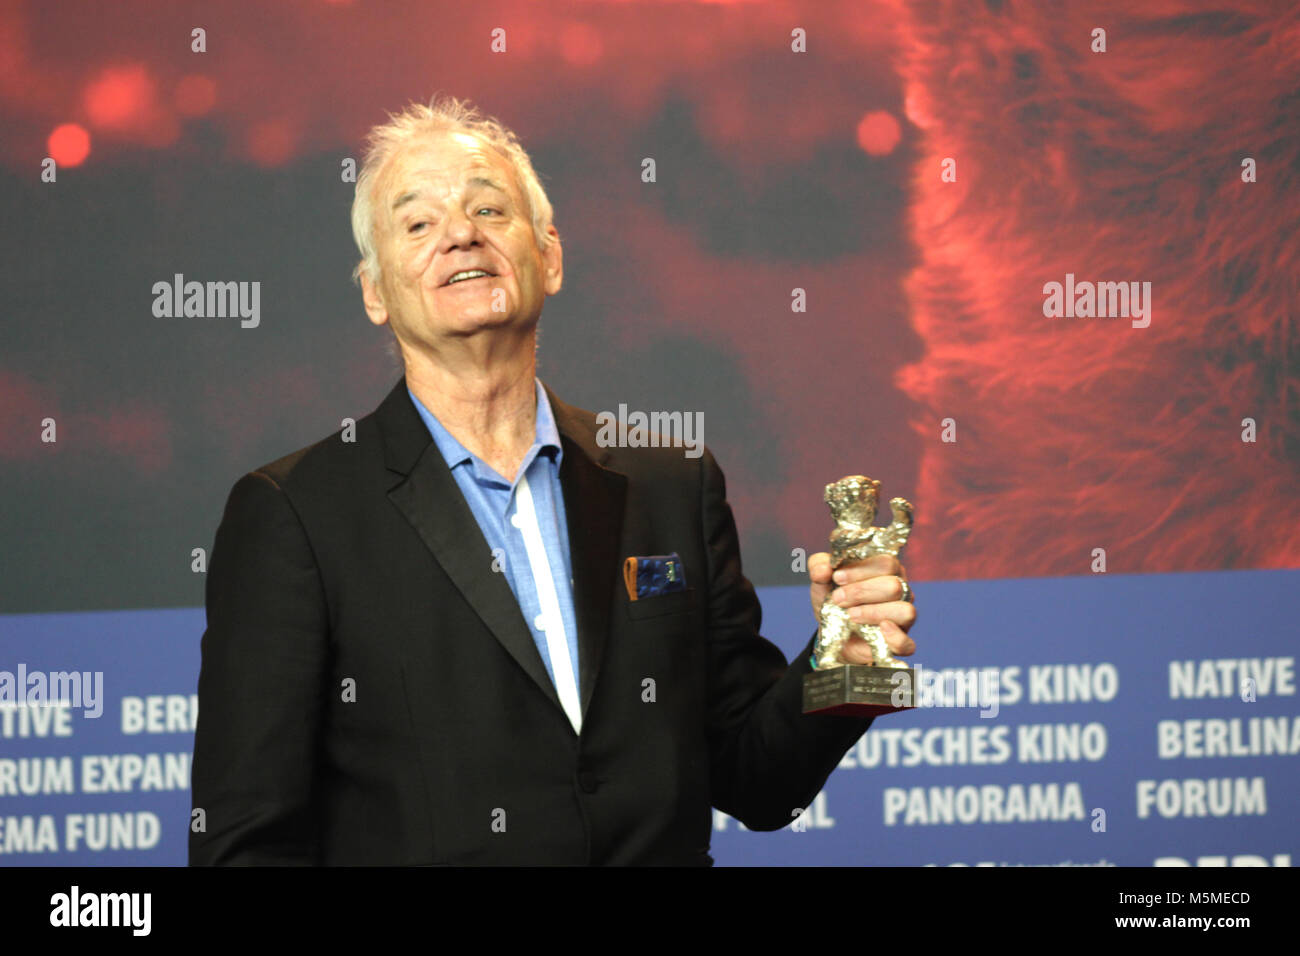 Berlin, Germany. 24th February, 2018. Wes Anderson, Winner of the “Silver Bear for Best Director” 68th Berlinale,Film;  Berlin, Germany. 24th February, 2018. Featuring:,  Bil  Murray, Press conference at the Grand Hyatt Hotel in Berlin/Germany, 68th Berlinale, “Credits: T.O.Pictures / Alamy Live News“ Stock Photo